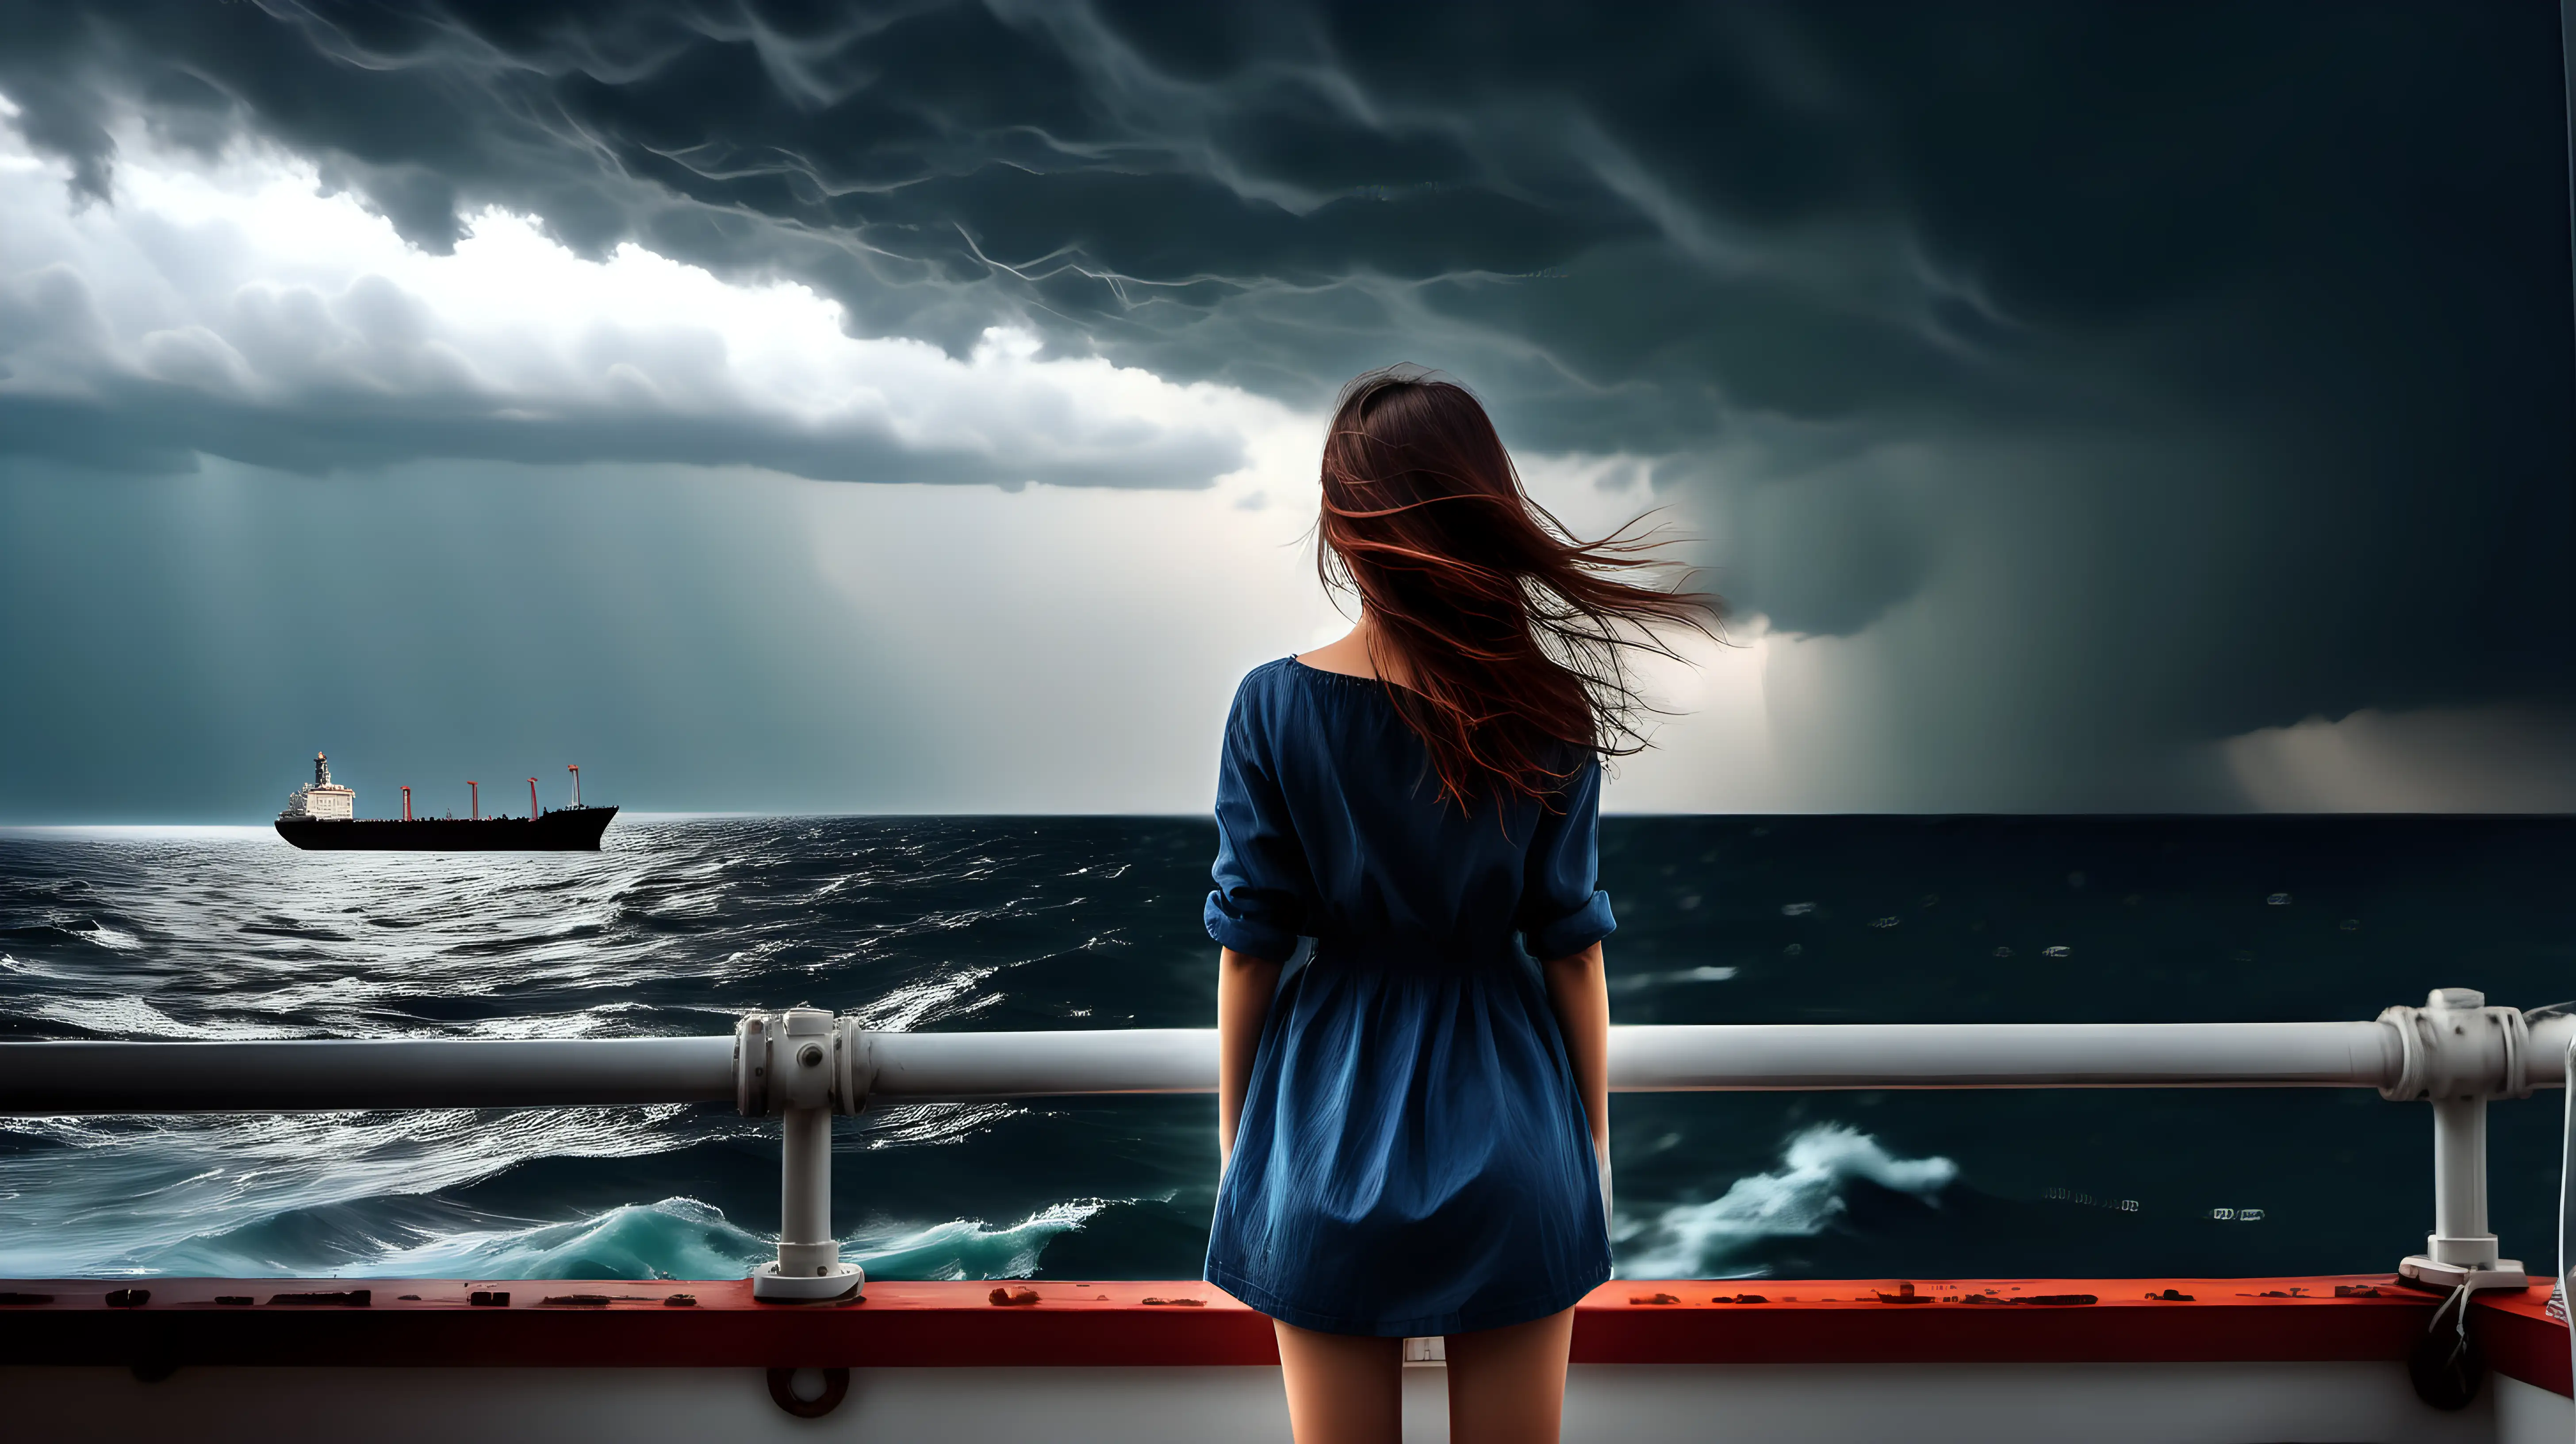 beauty girl dressed alone watching side sea in storm horizon ship
